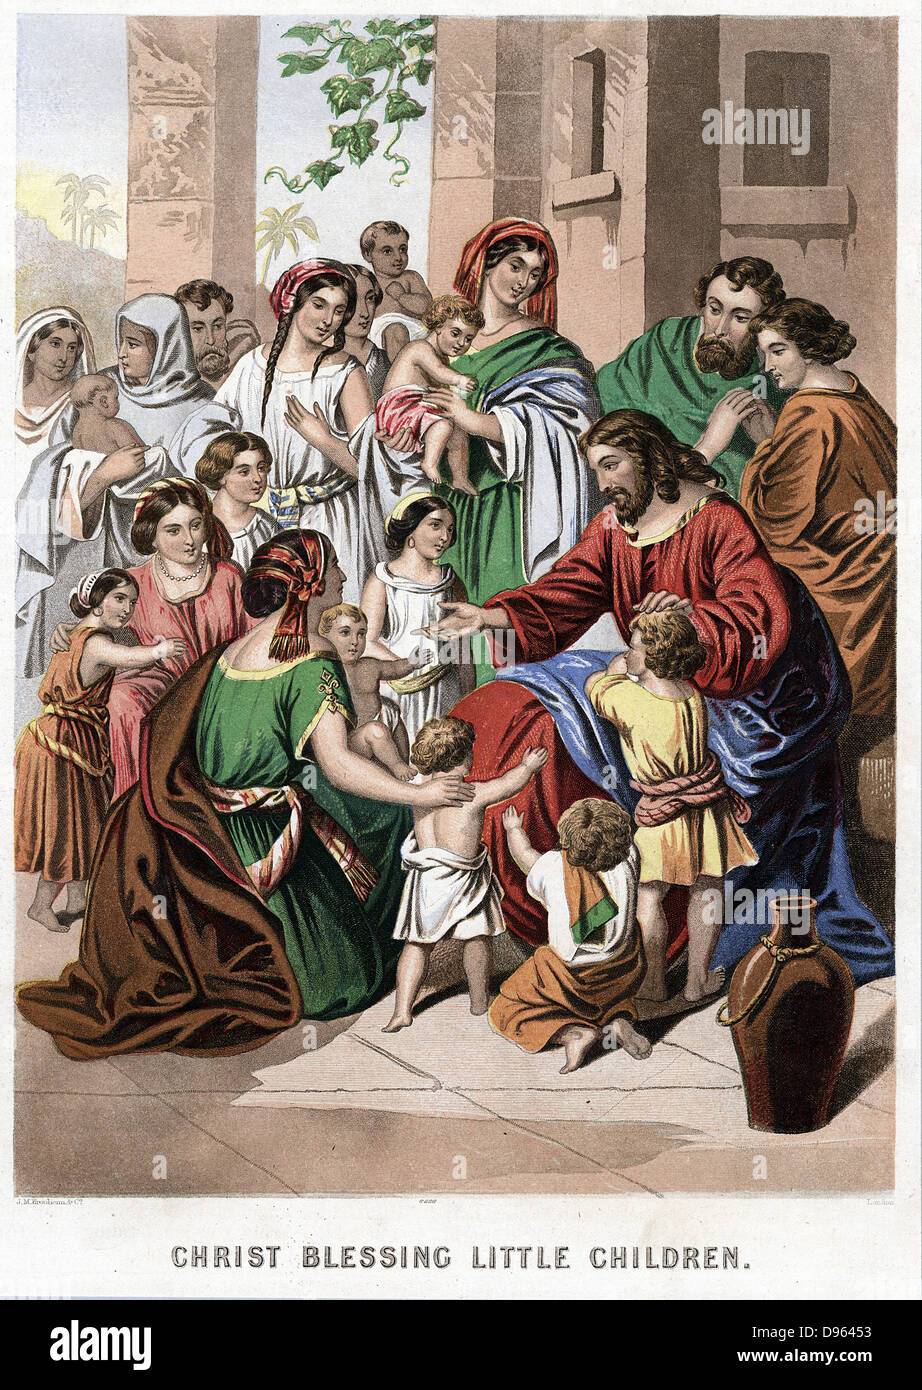 Christ and the little children. 'Whosoever shall not receive the kingdom of God as a little child, he shall not enter therein'.  'Bible' Mark 10.  Mid-19th century chromolithograph by Kronheim & Co. Stock Photo